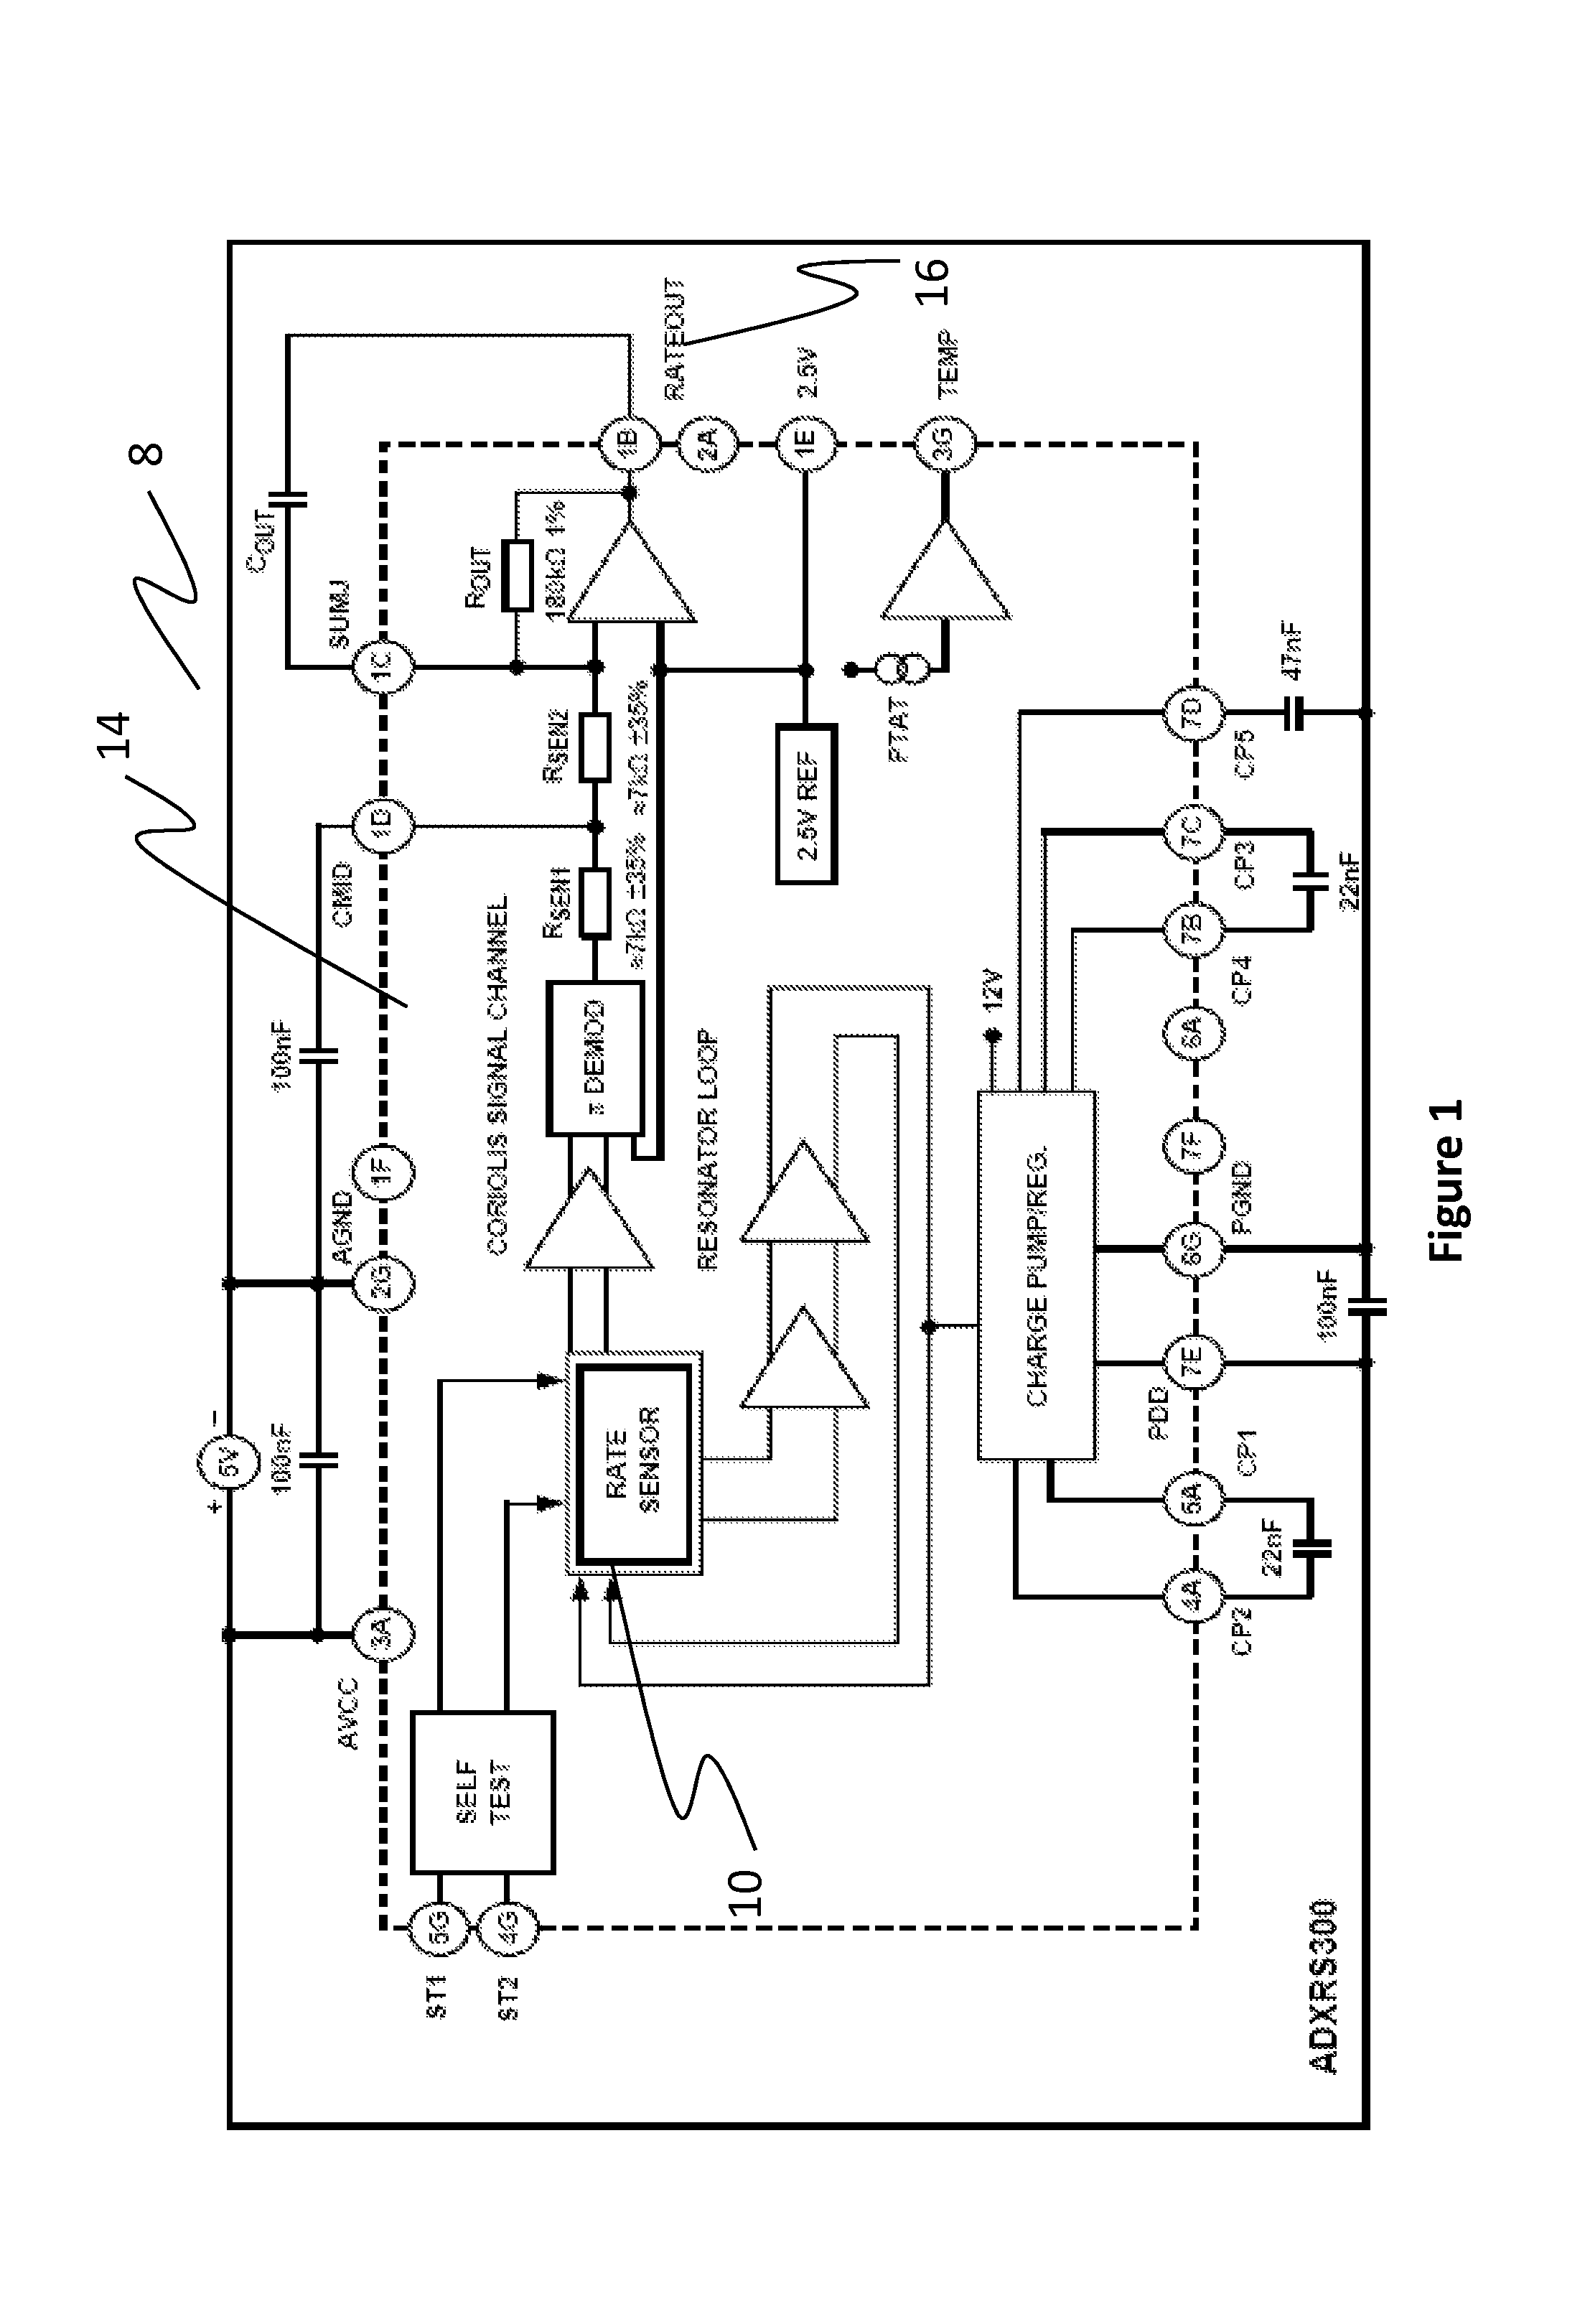 Movement disorder monitoring system and method